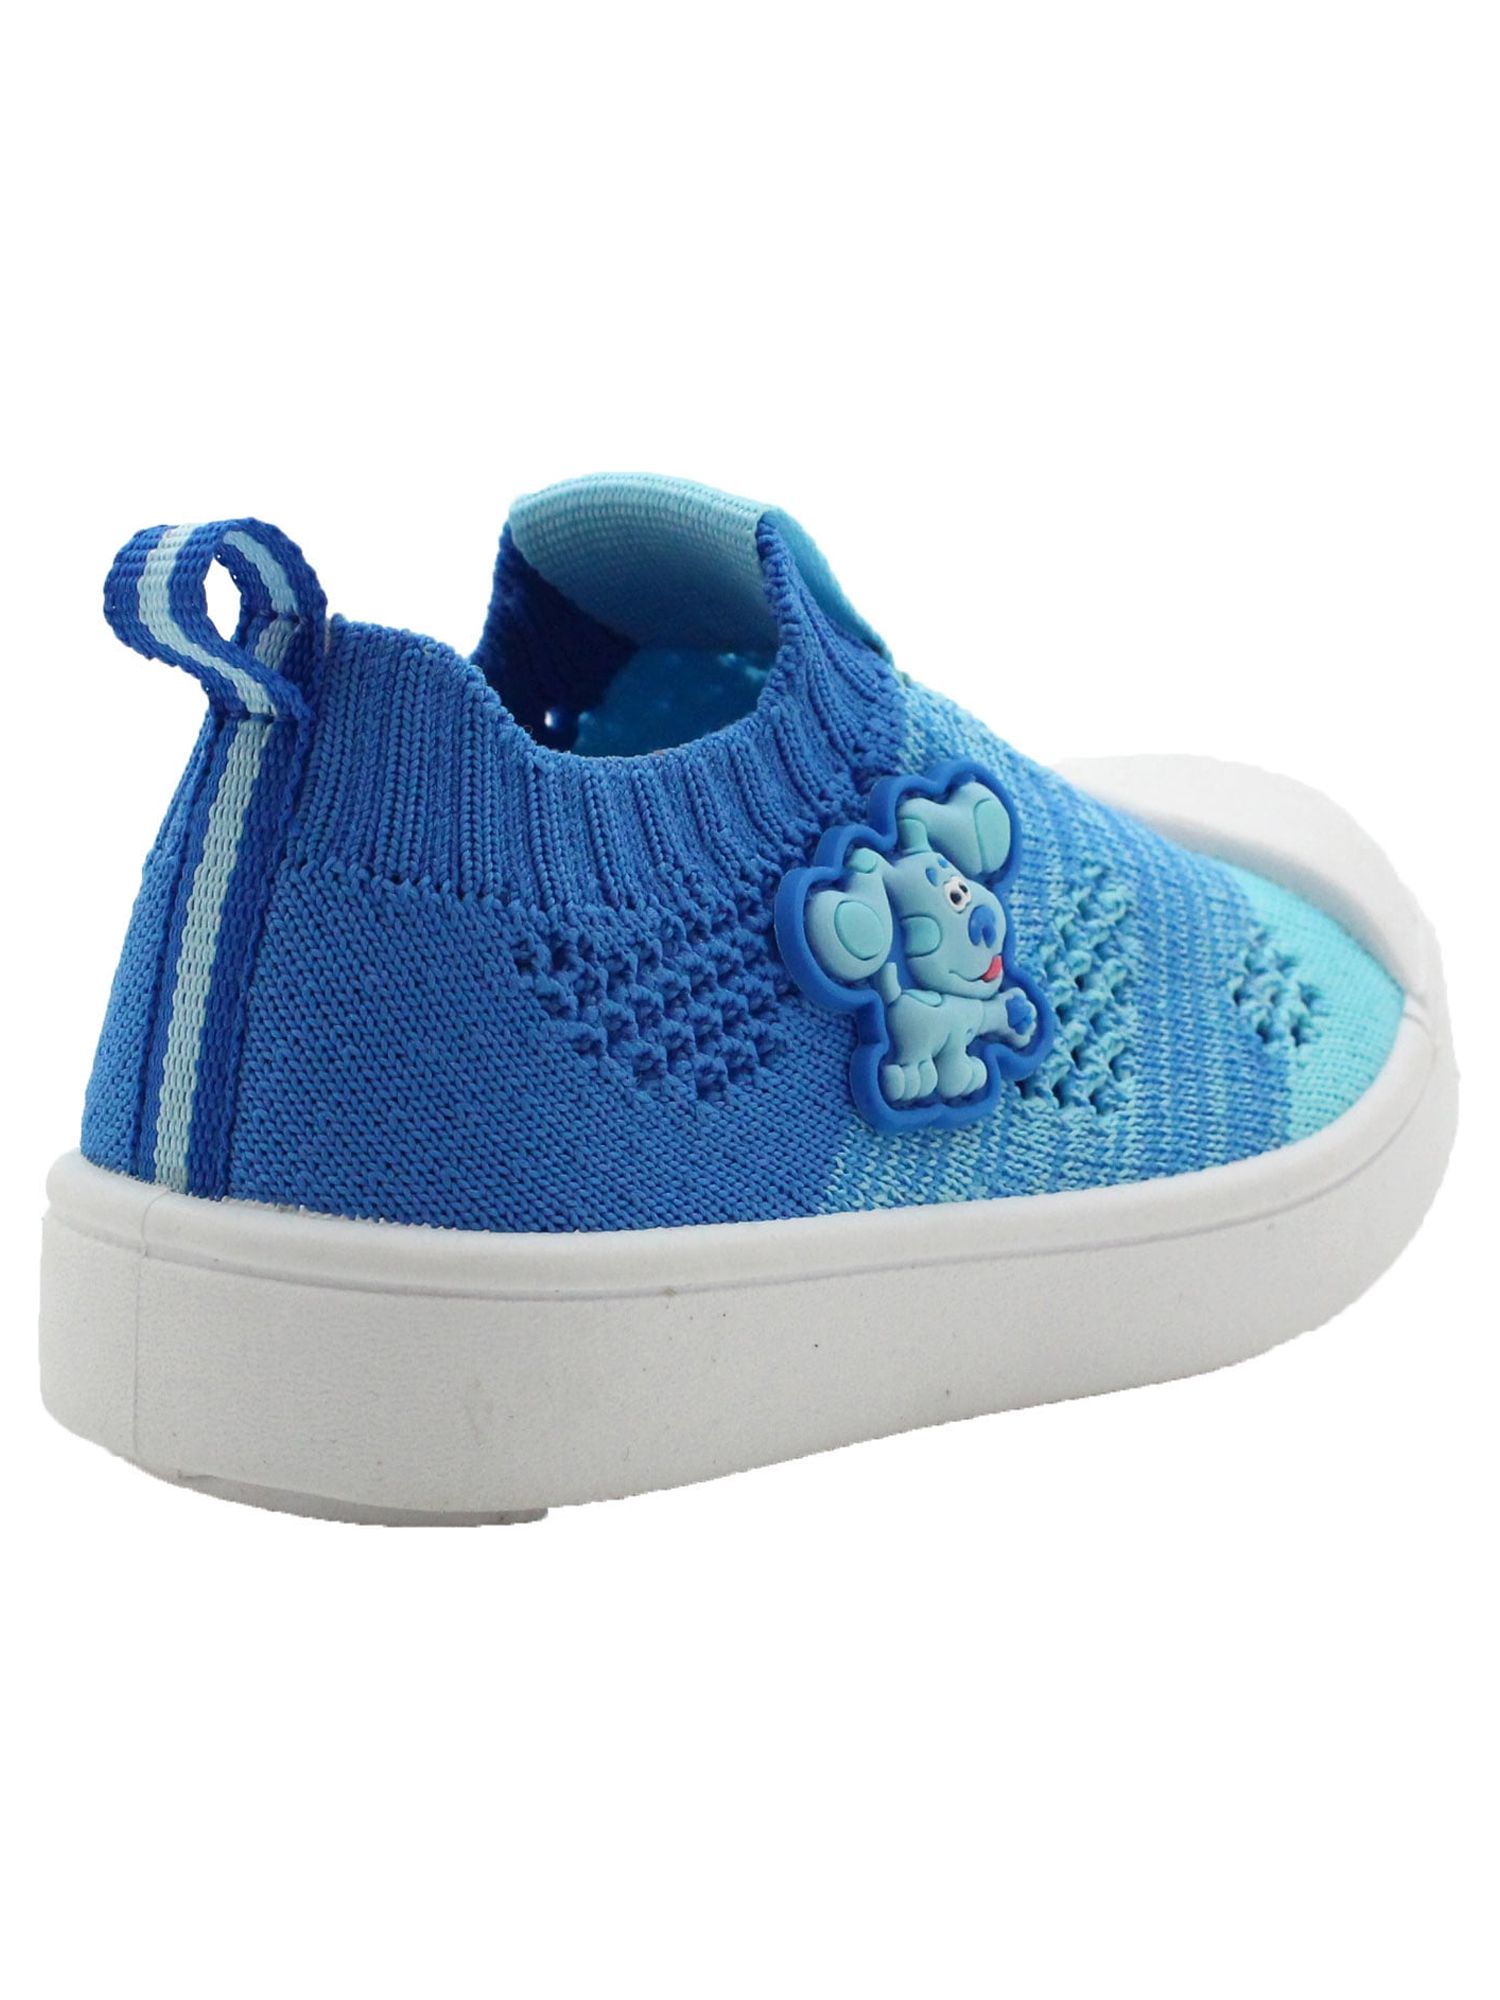 Blues Clues License Toddler Boy or Girl Casual Slip-on Shoes, Sizes 6-11 - image 3 of 6